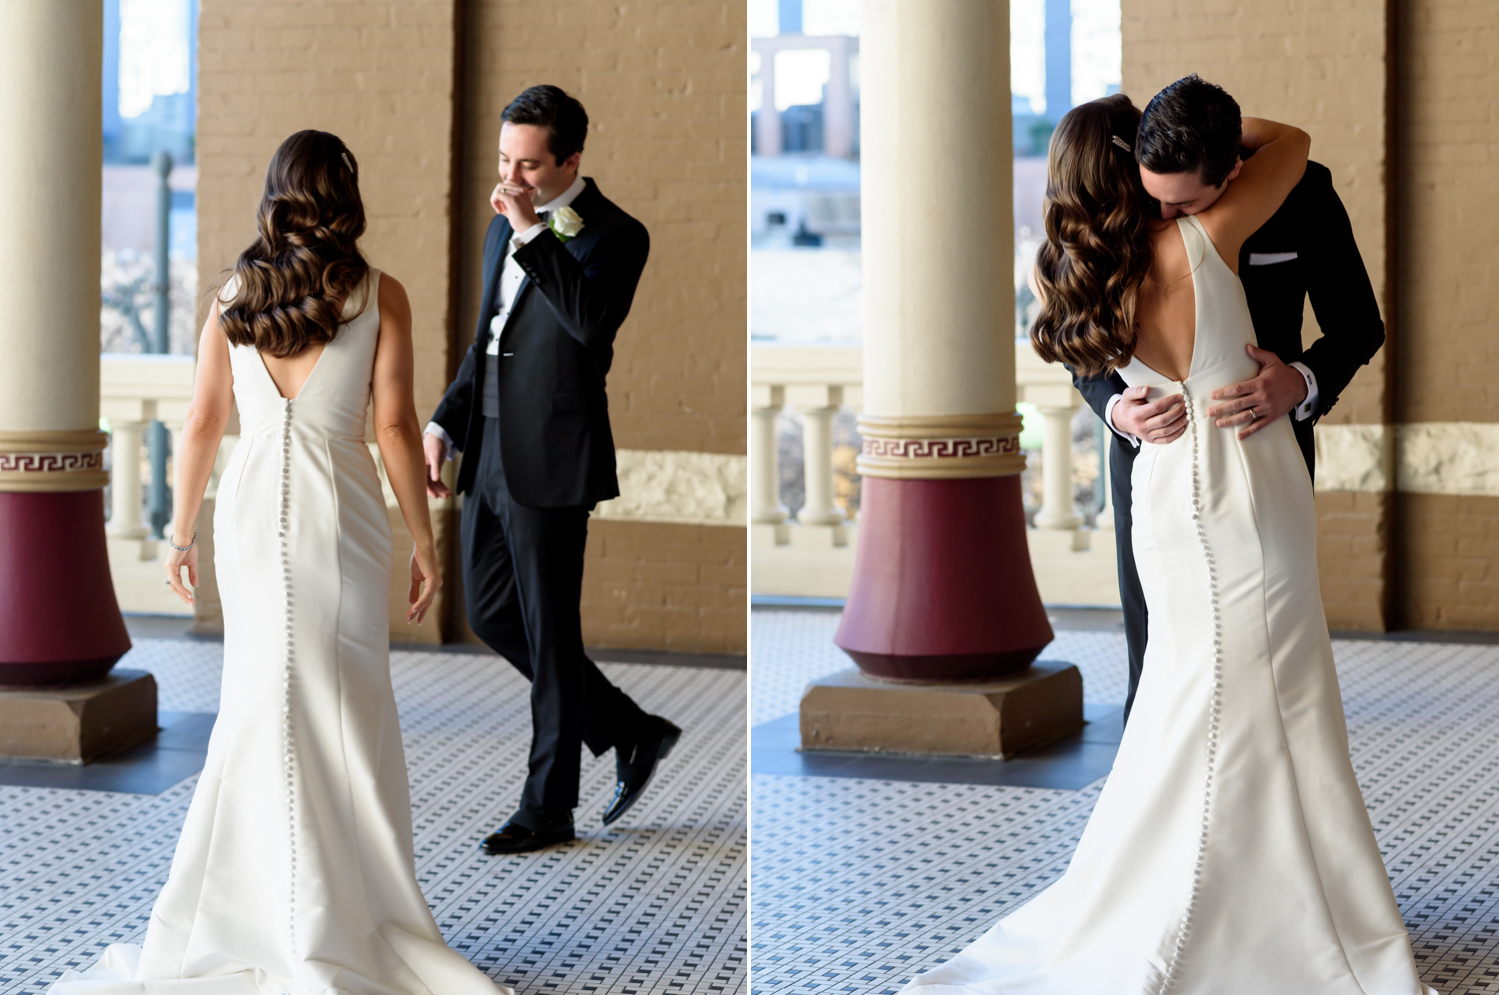 Left: The groom smiles and covers his mouth after seeing his bride for the first time in her dress. Right: the groom hugs his bride after the first look.